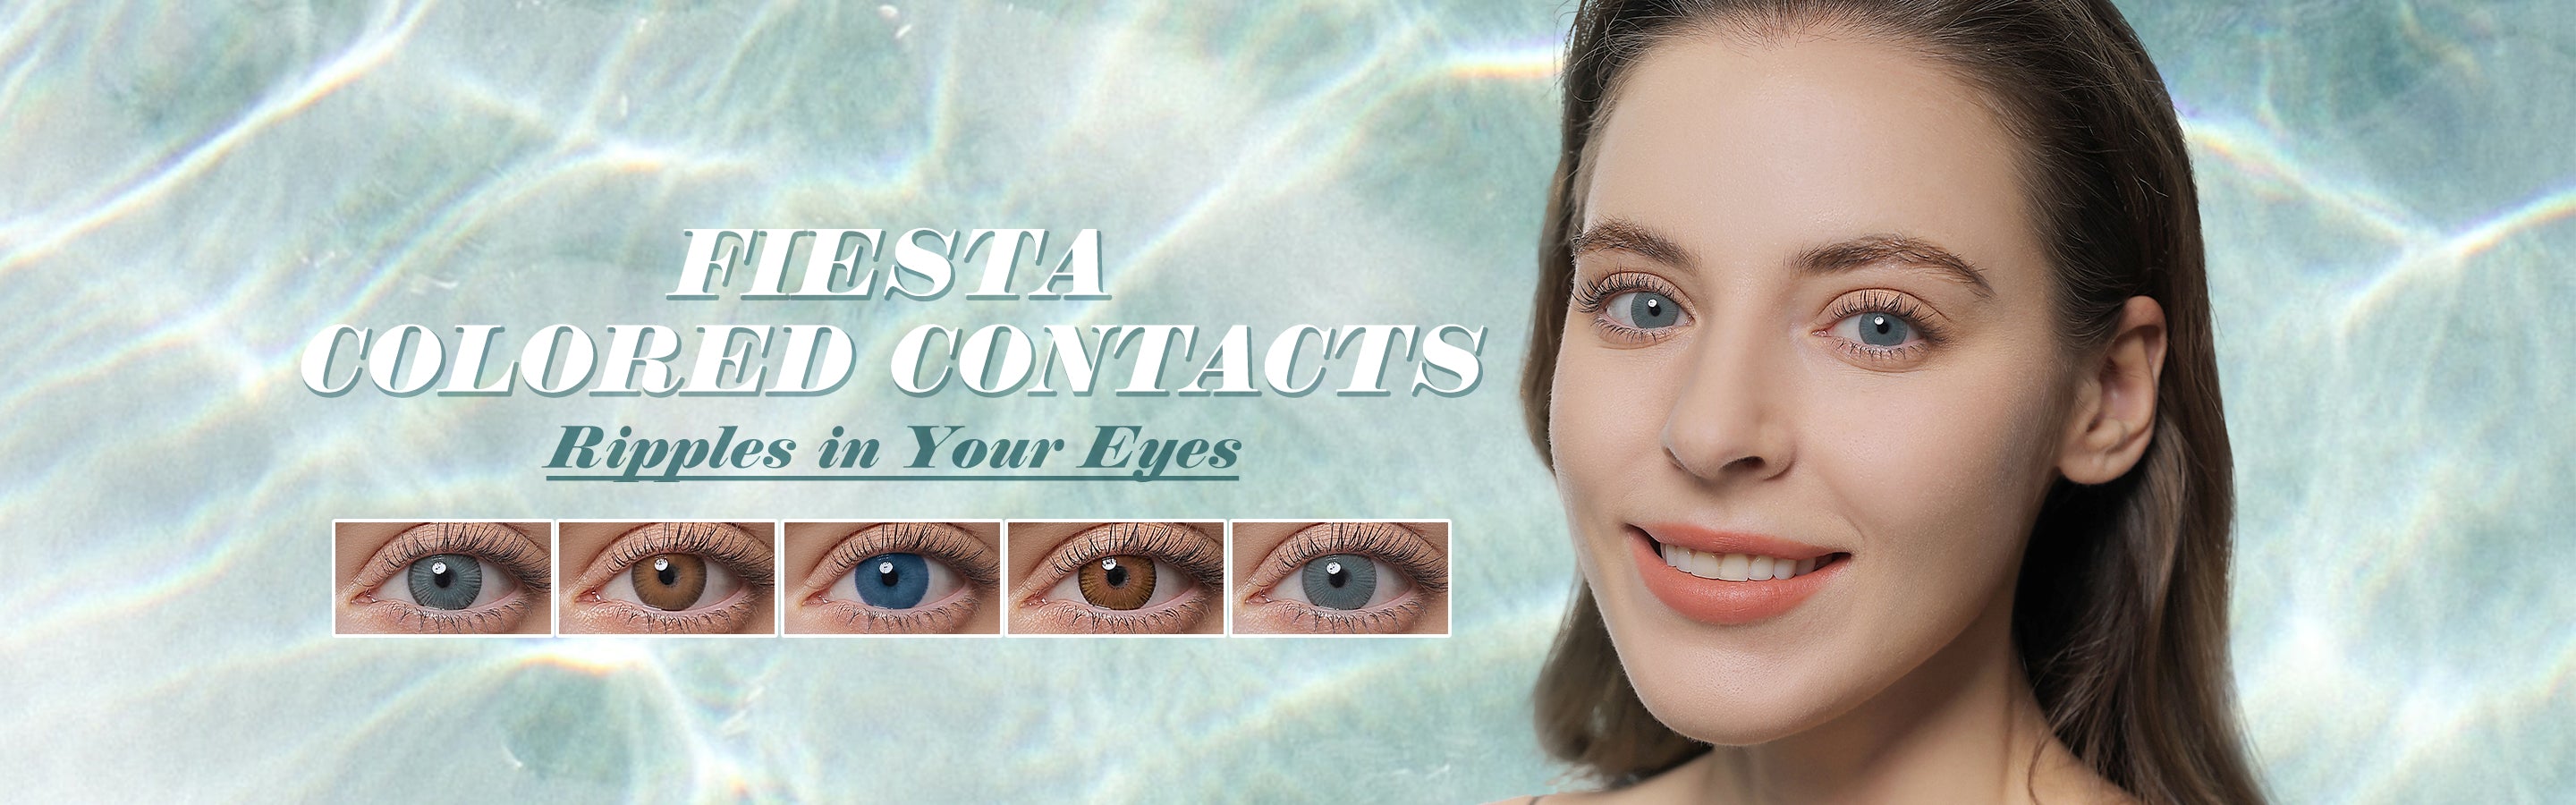 Fiesta Colored Contacts